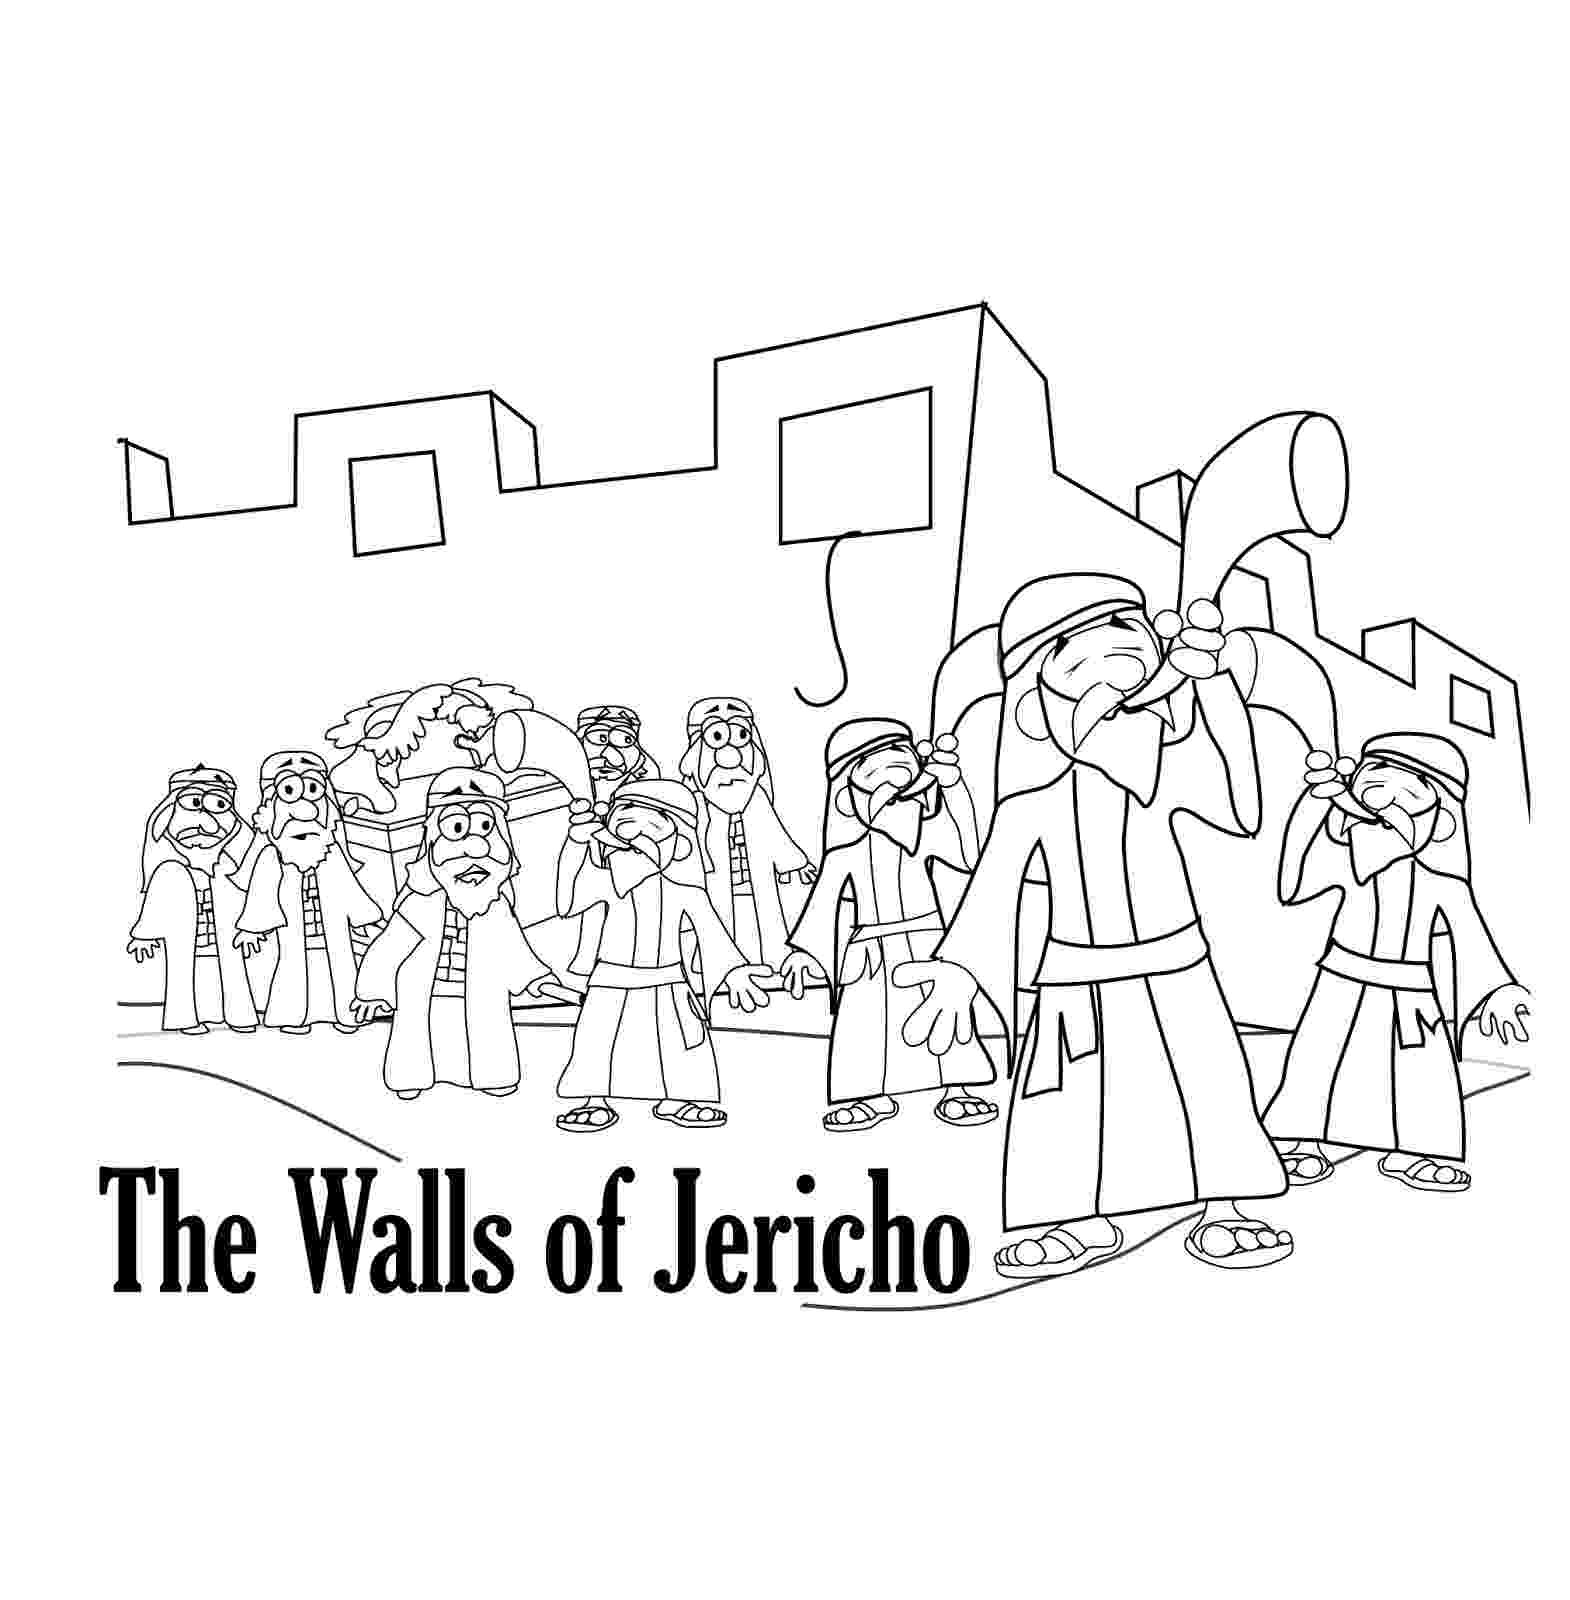 jericho walls coloring page jericho coloring playtime build walls with blocks march jericho walls coloring page 